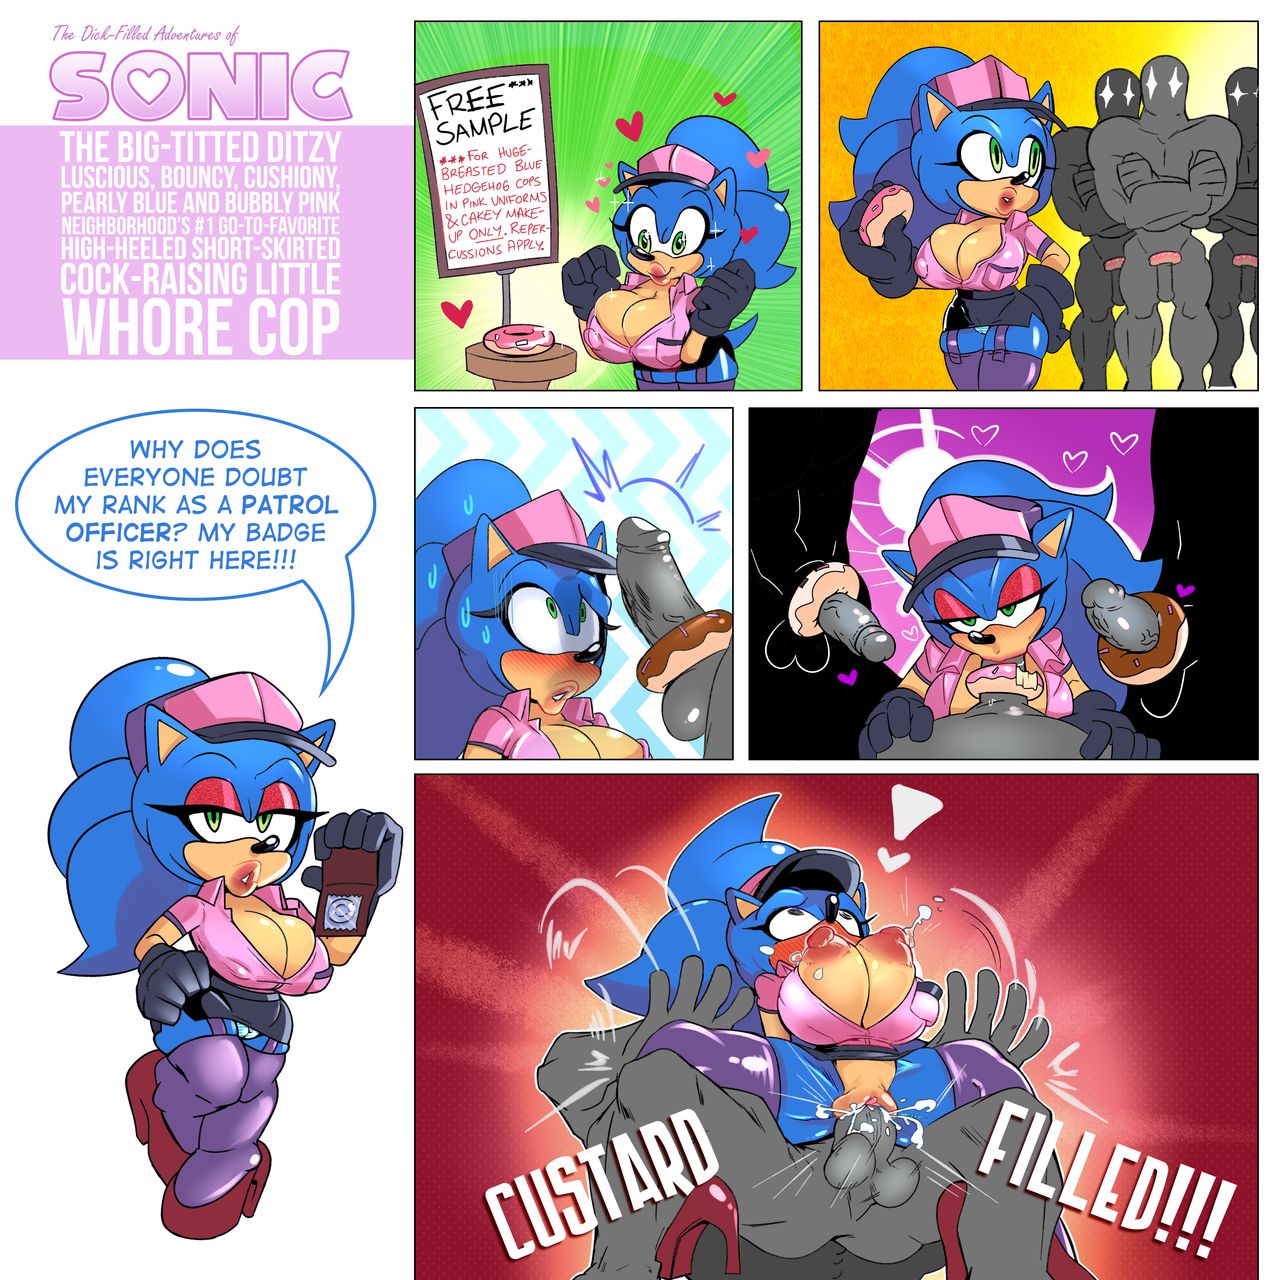 Sonic Whore Porn - Sonic The Whore Cop - Miss Phase - KingComiX.com